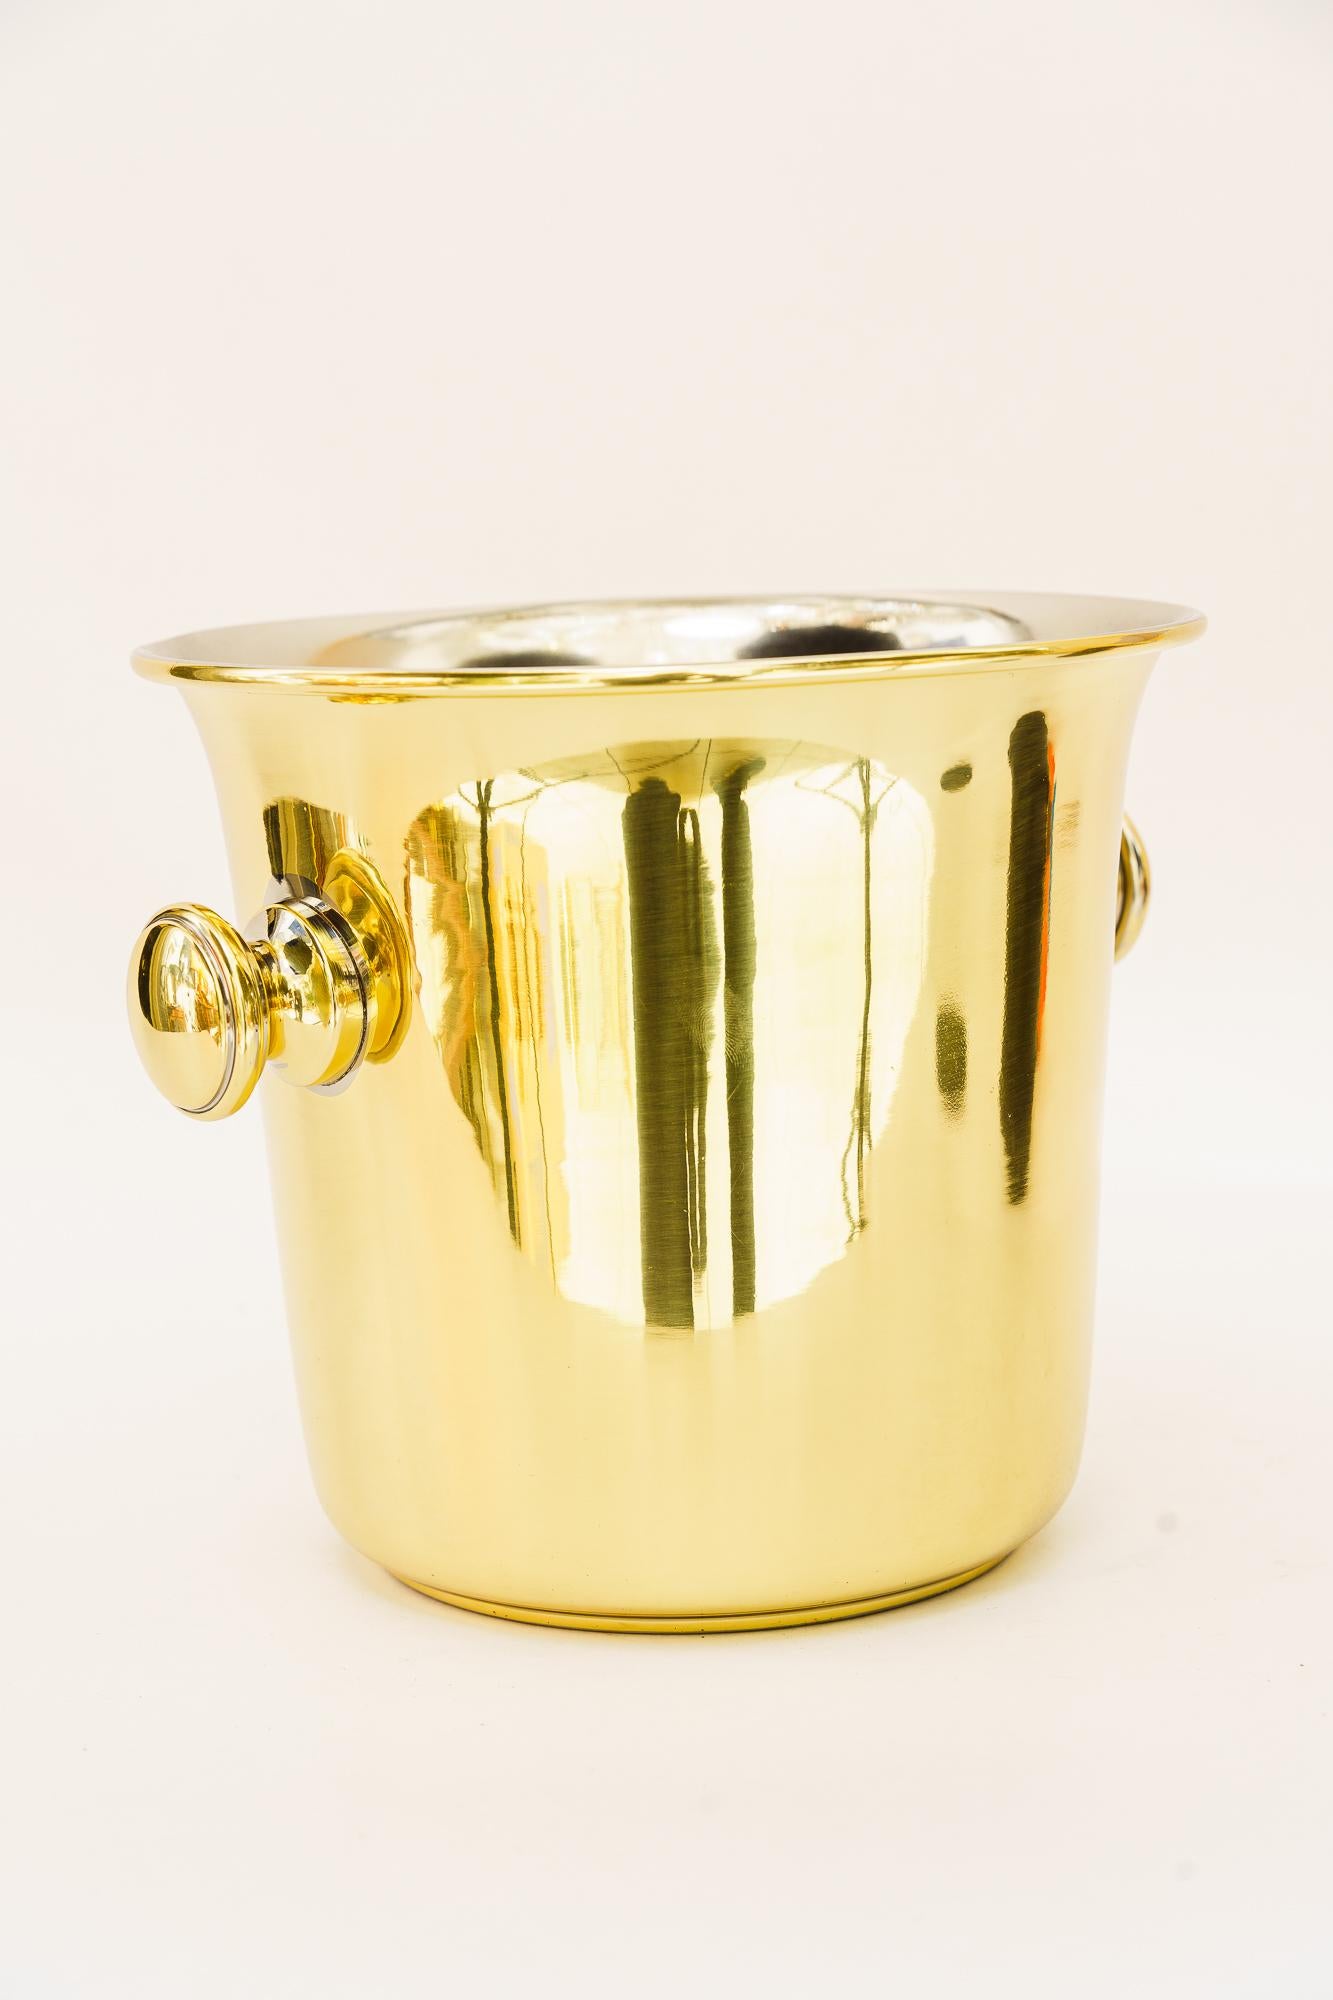 Brass Champagne Bucket vienna around 1950s
Brass polished and stove enameled